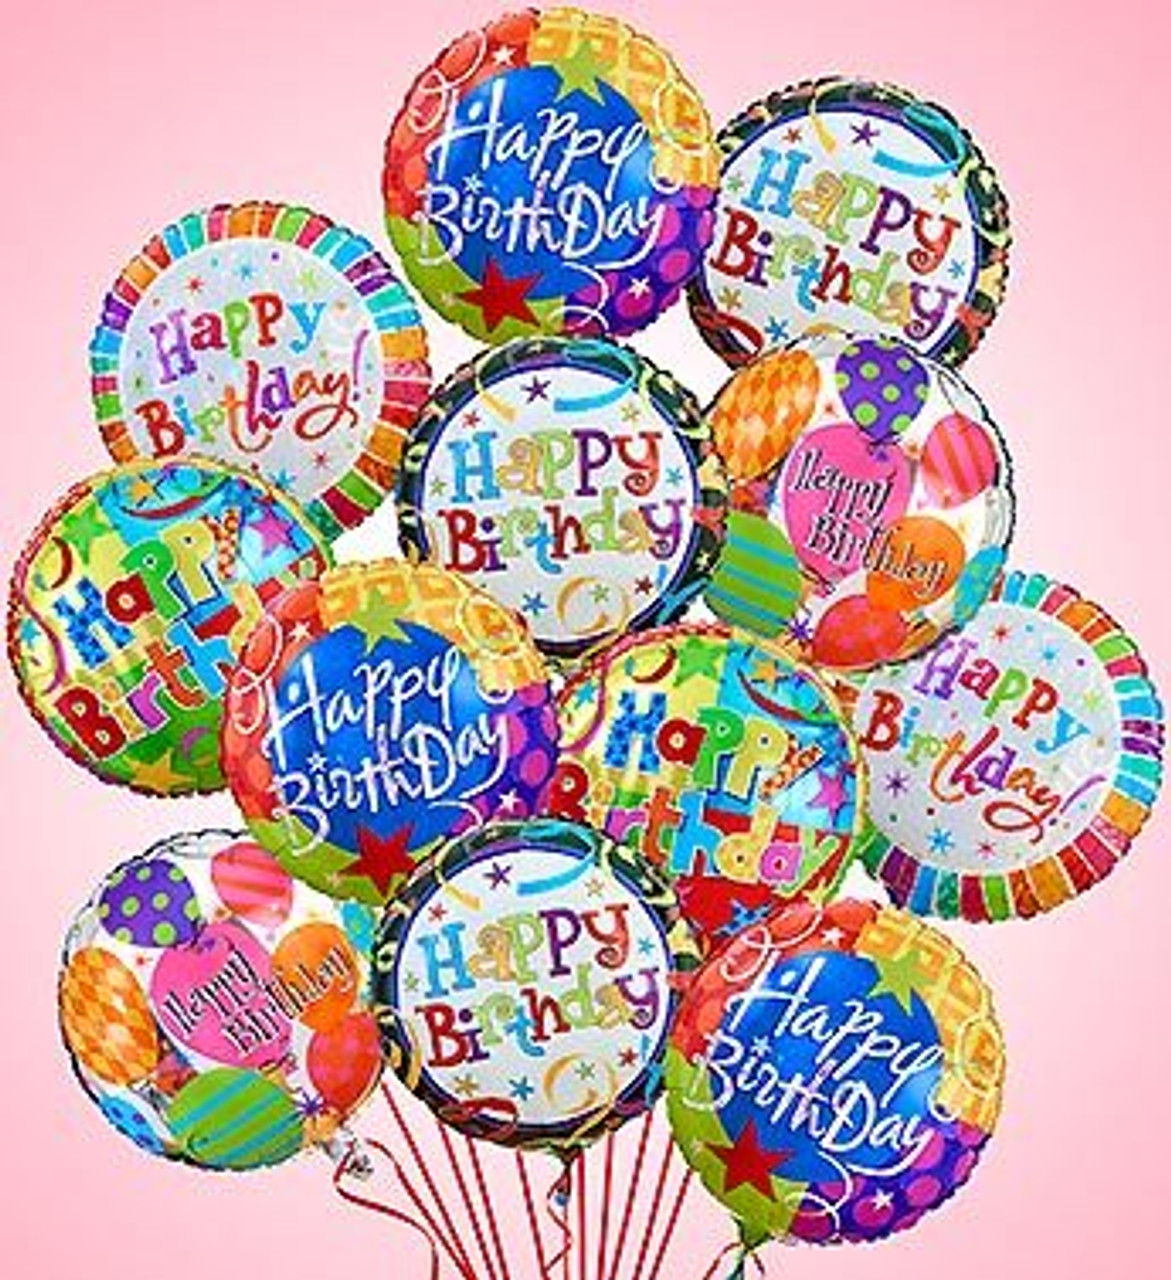 Birthday balloons daily balloon selling coin package